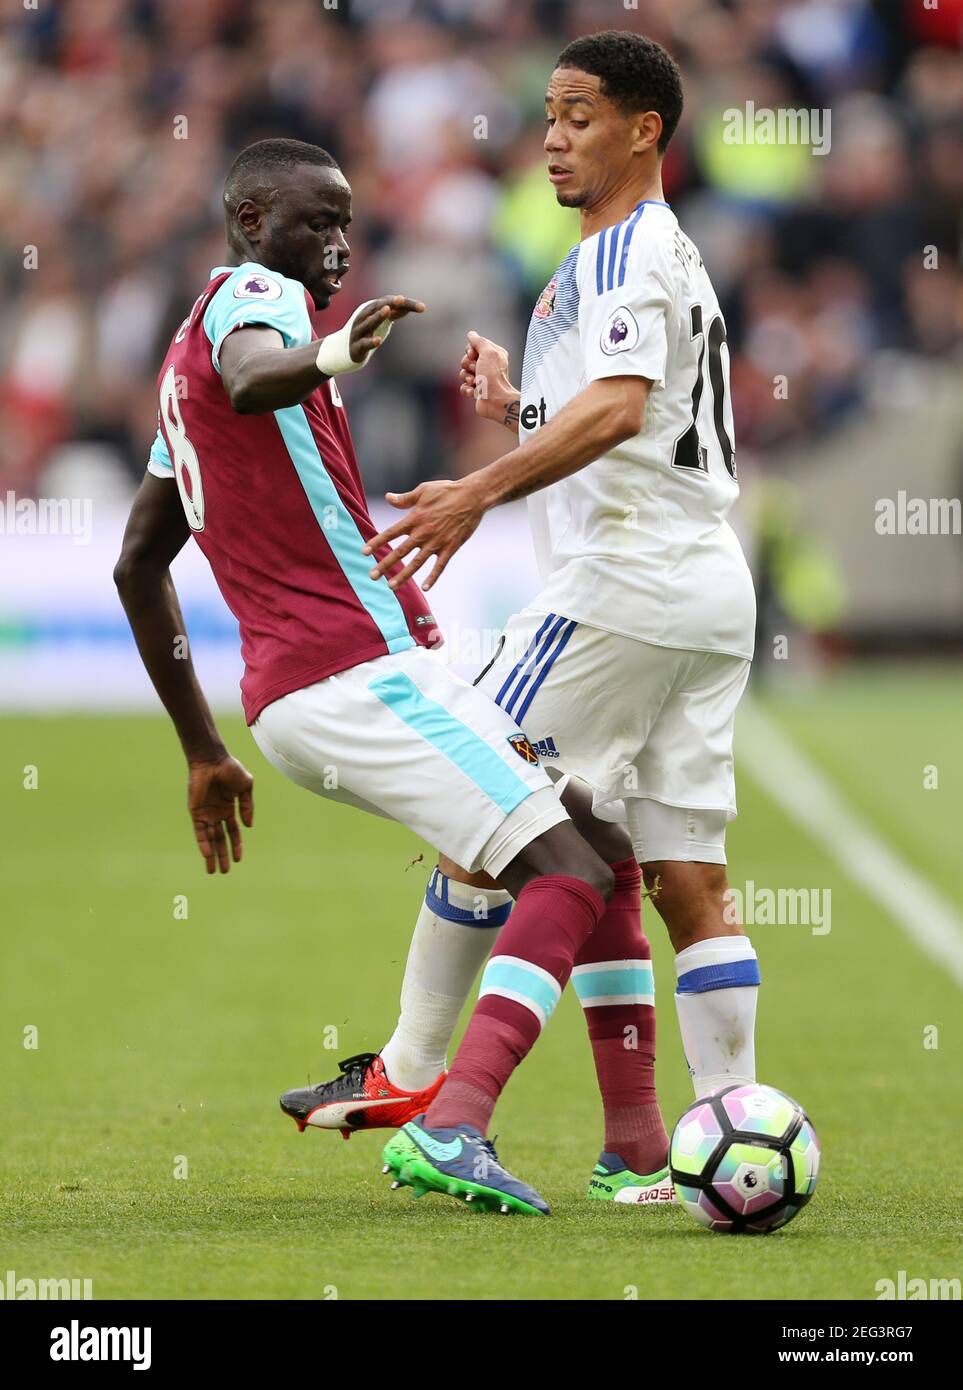 Britain Soccer Football - West Ham United v Sunderland - Premier League - London Stadium - 22/10/16 West Ham United's Cheikhou Kouyate in action with Sunderland's Steven Pienaar  Reuters / Paul Hackett Livepic EDITORIAL USE ONLY. No use with unauthorized audio, video, data, fixture lists, club/league logos or 'live' services. Online in-match use limited to 45 images, no video emulation. No use in betting, games or single club/league/player publications.  Please contact your account representative for further details. Stock Photo